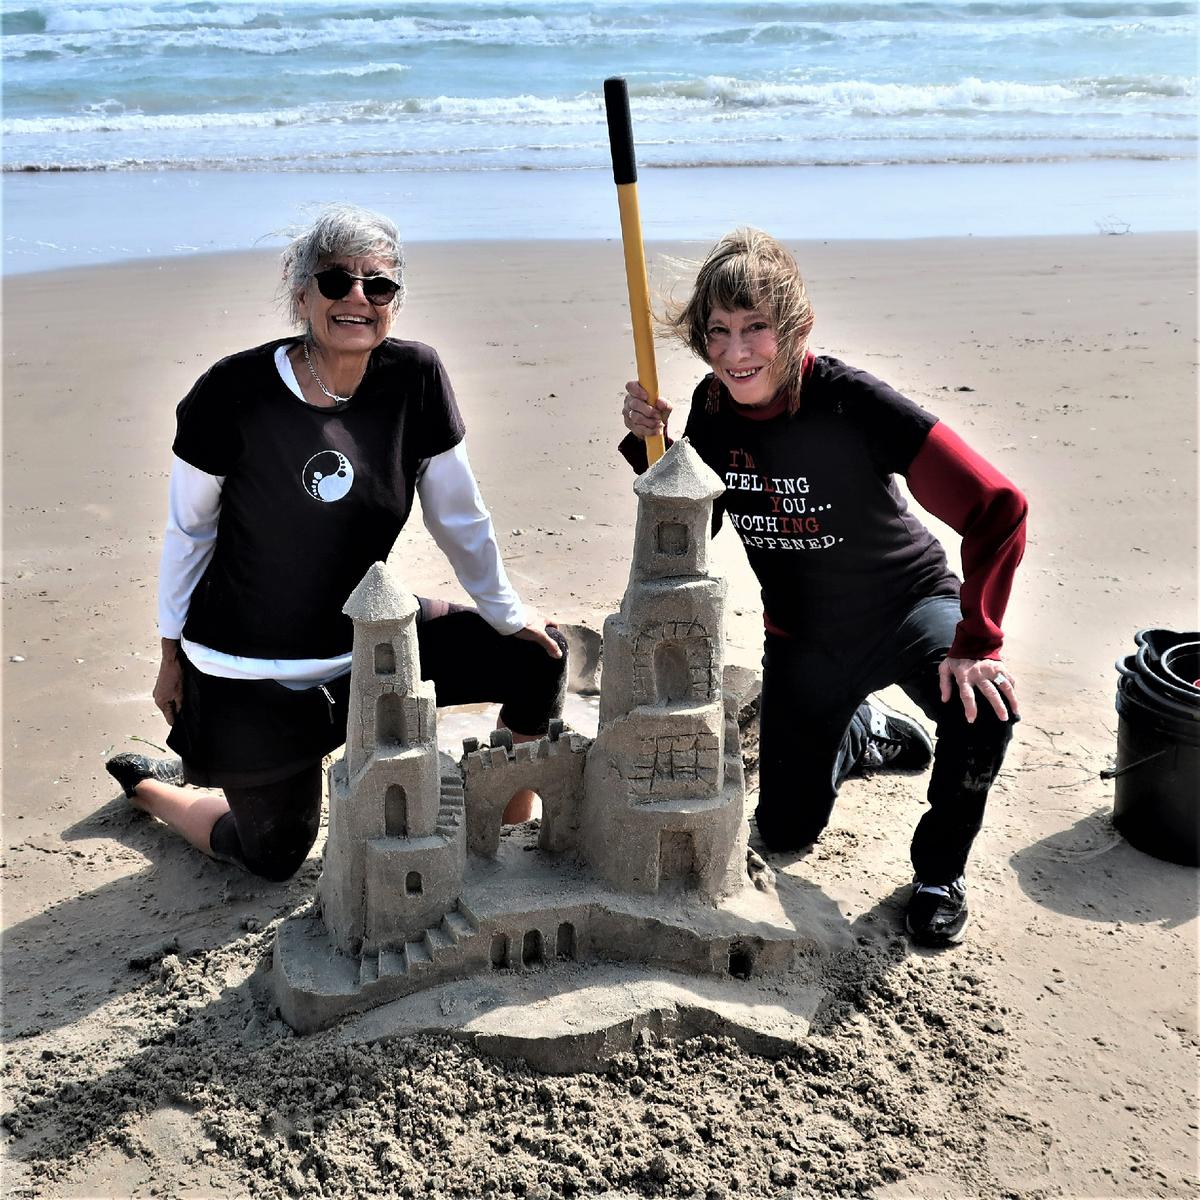 Lucinda Wierenga (L) gives the author a lesson on how to build a sandcastle on South Padre Island, Texas. (Victor Block)